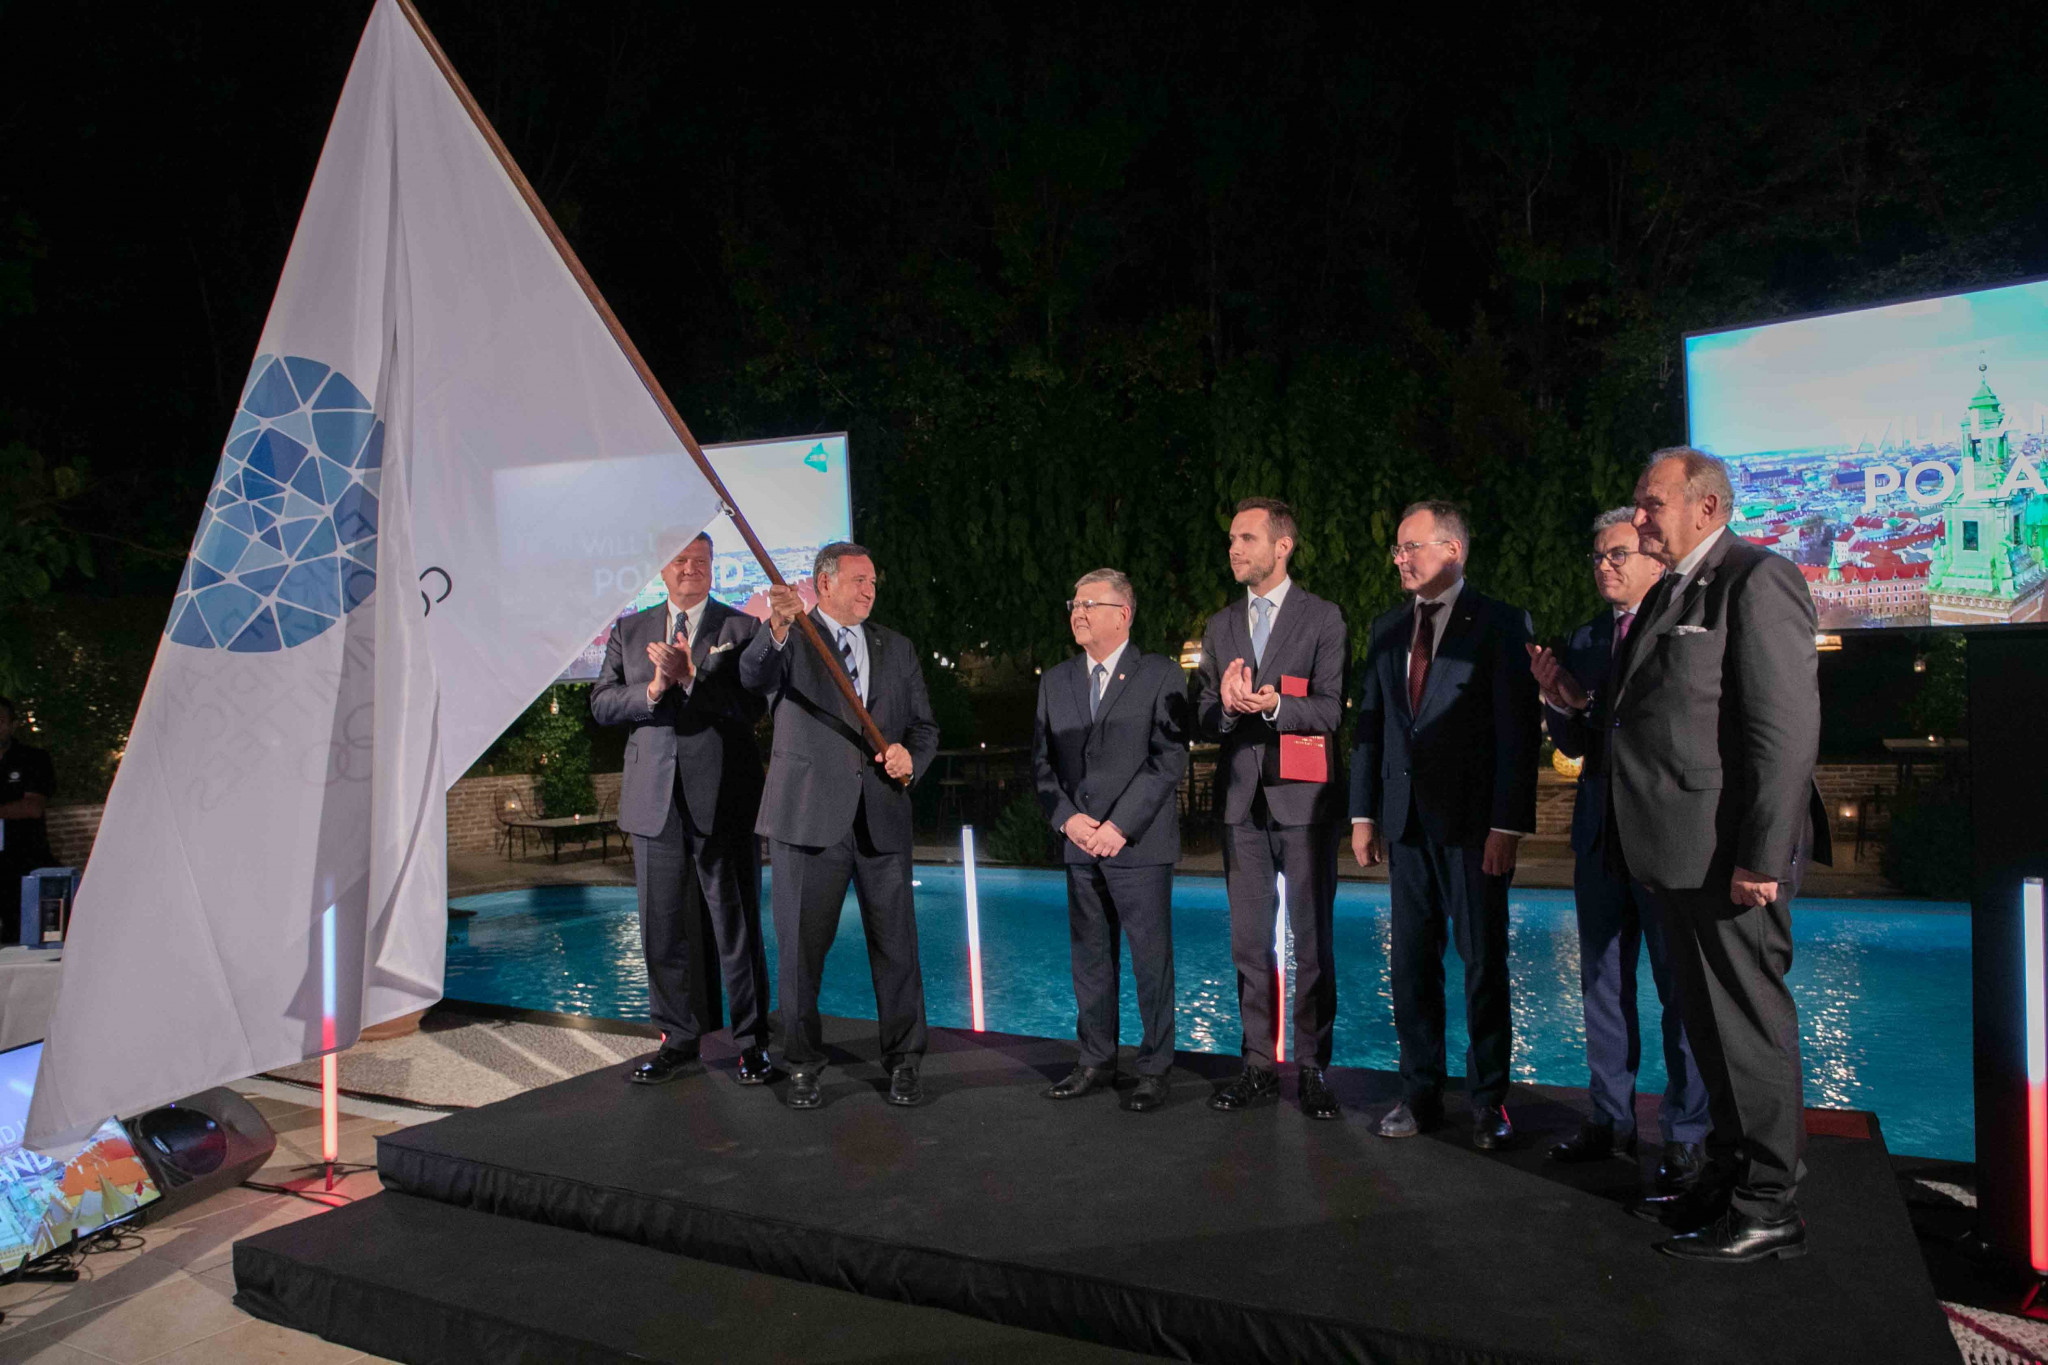 The EOC flag was handed over to the Kraków-Małopolska 2023 delegation in Ancient Olympia ©Getty Images